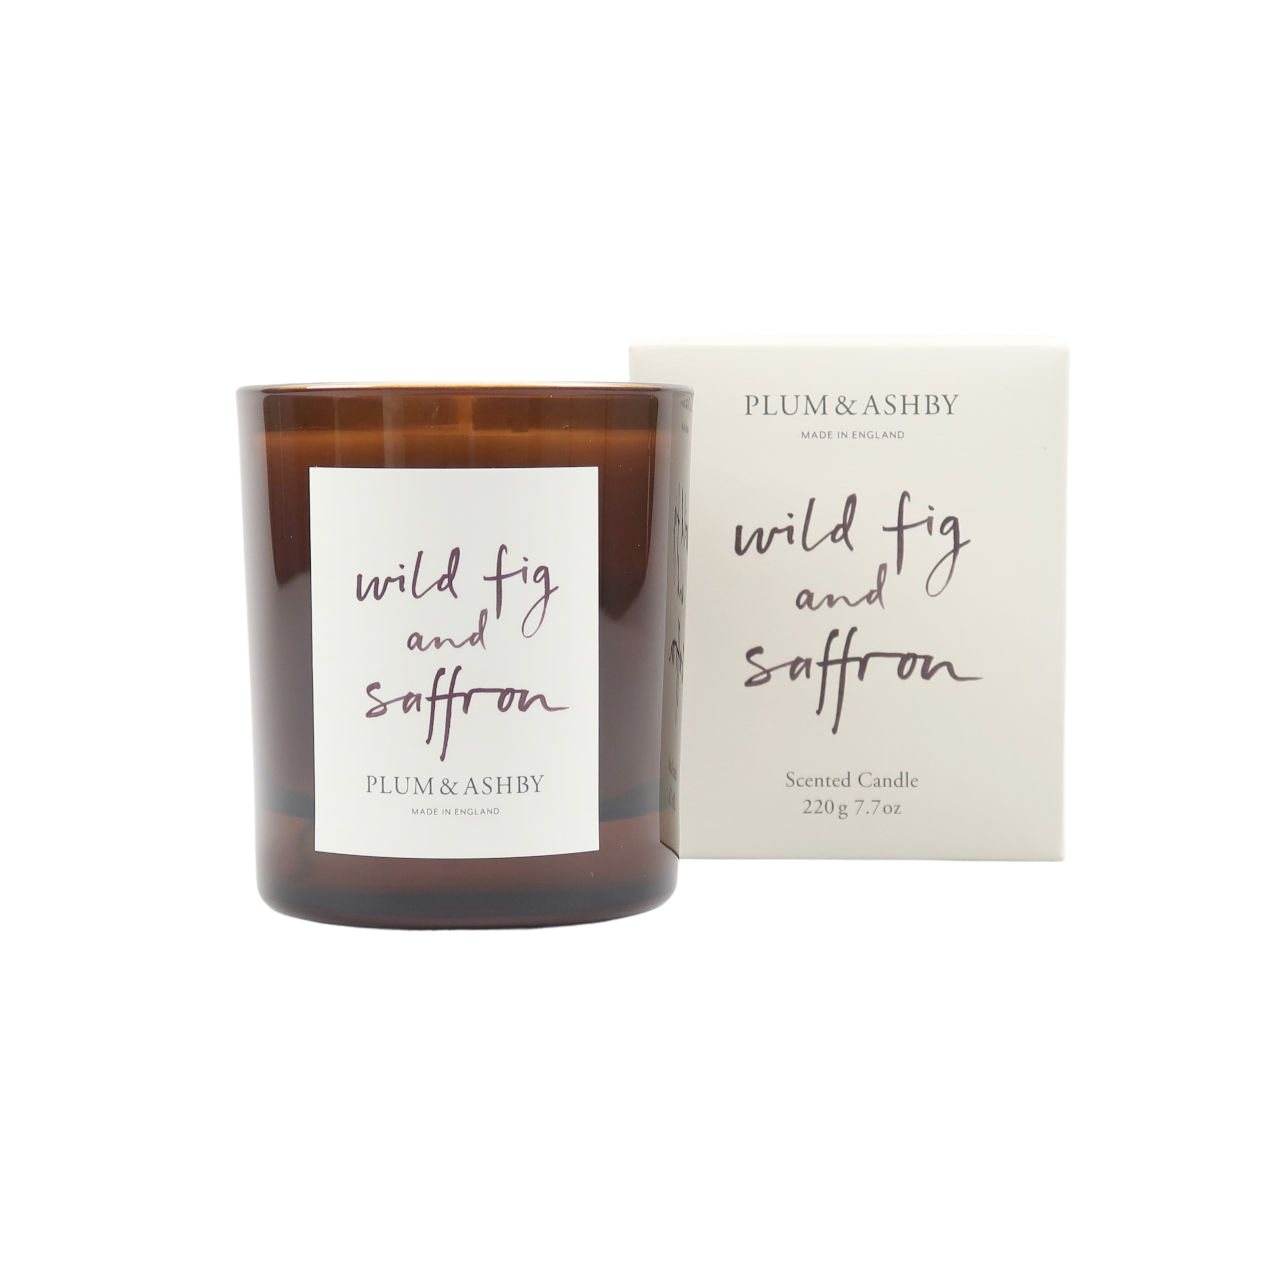 Plum + Ashby Wild Fig & Saffron Scented Candle - Large